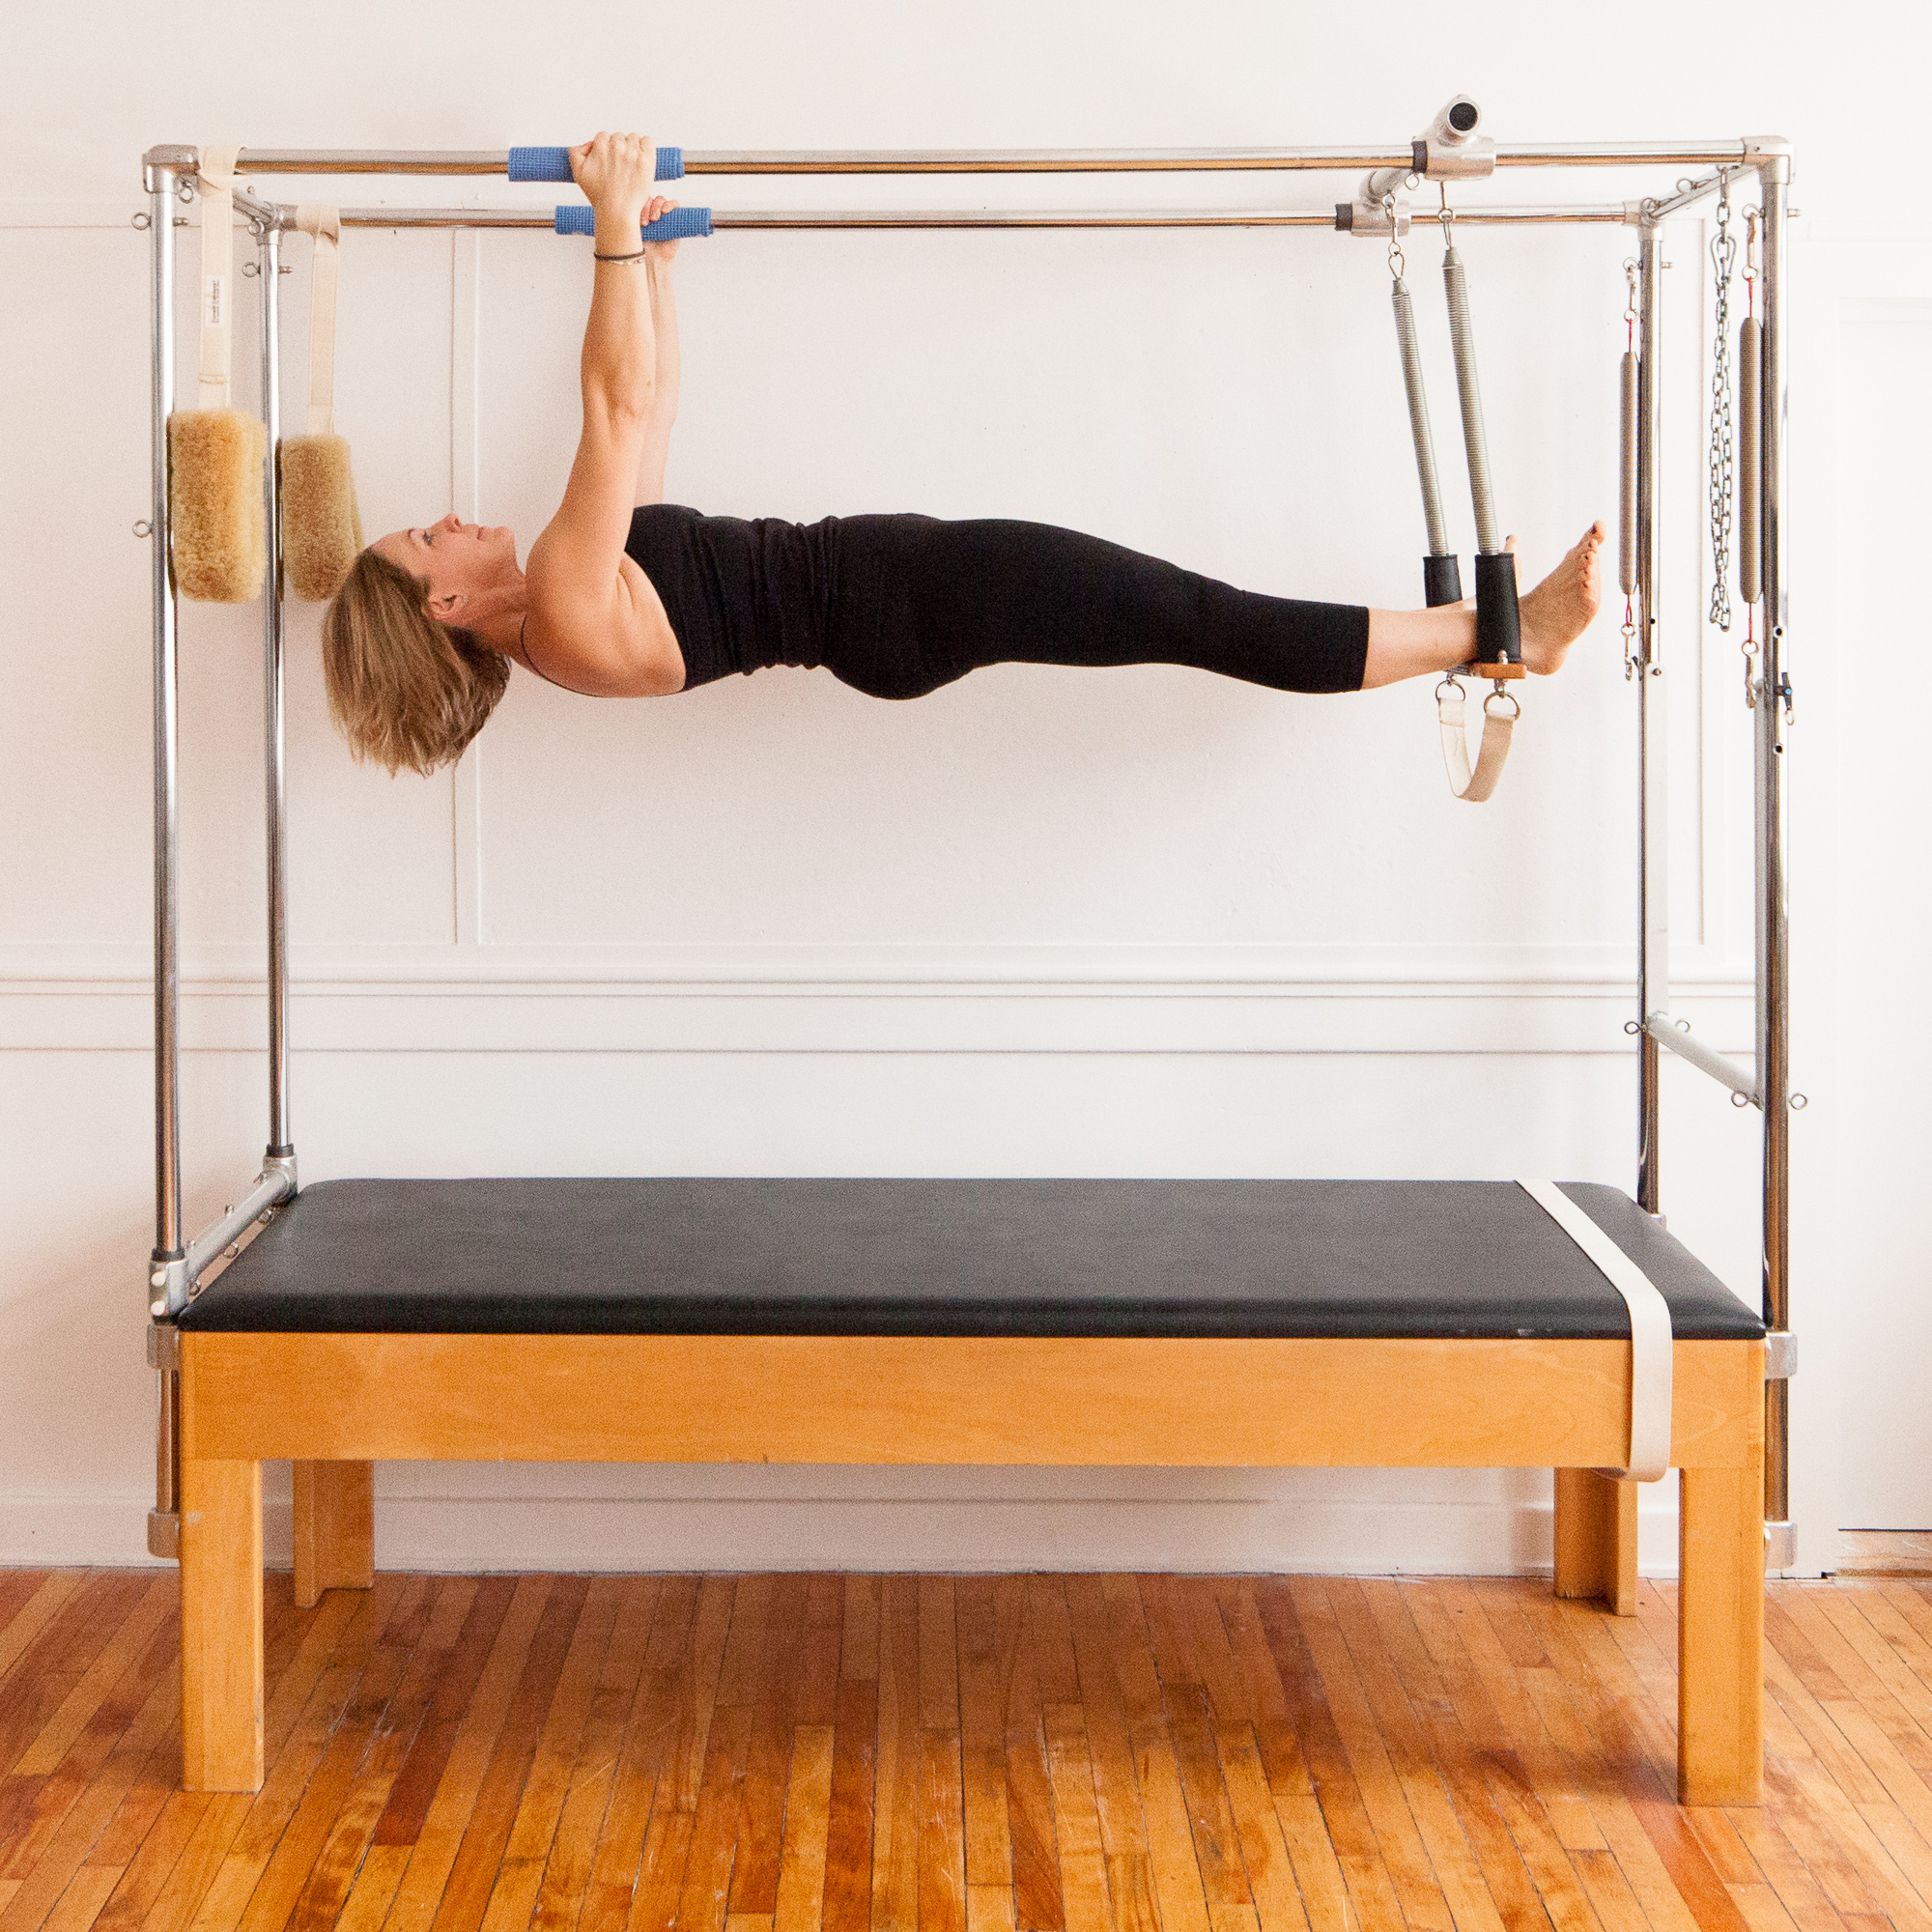 How to Do Pull-Ups on the Pilates Reformer 